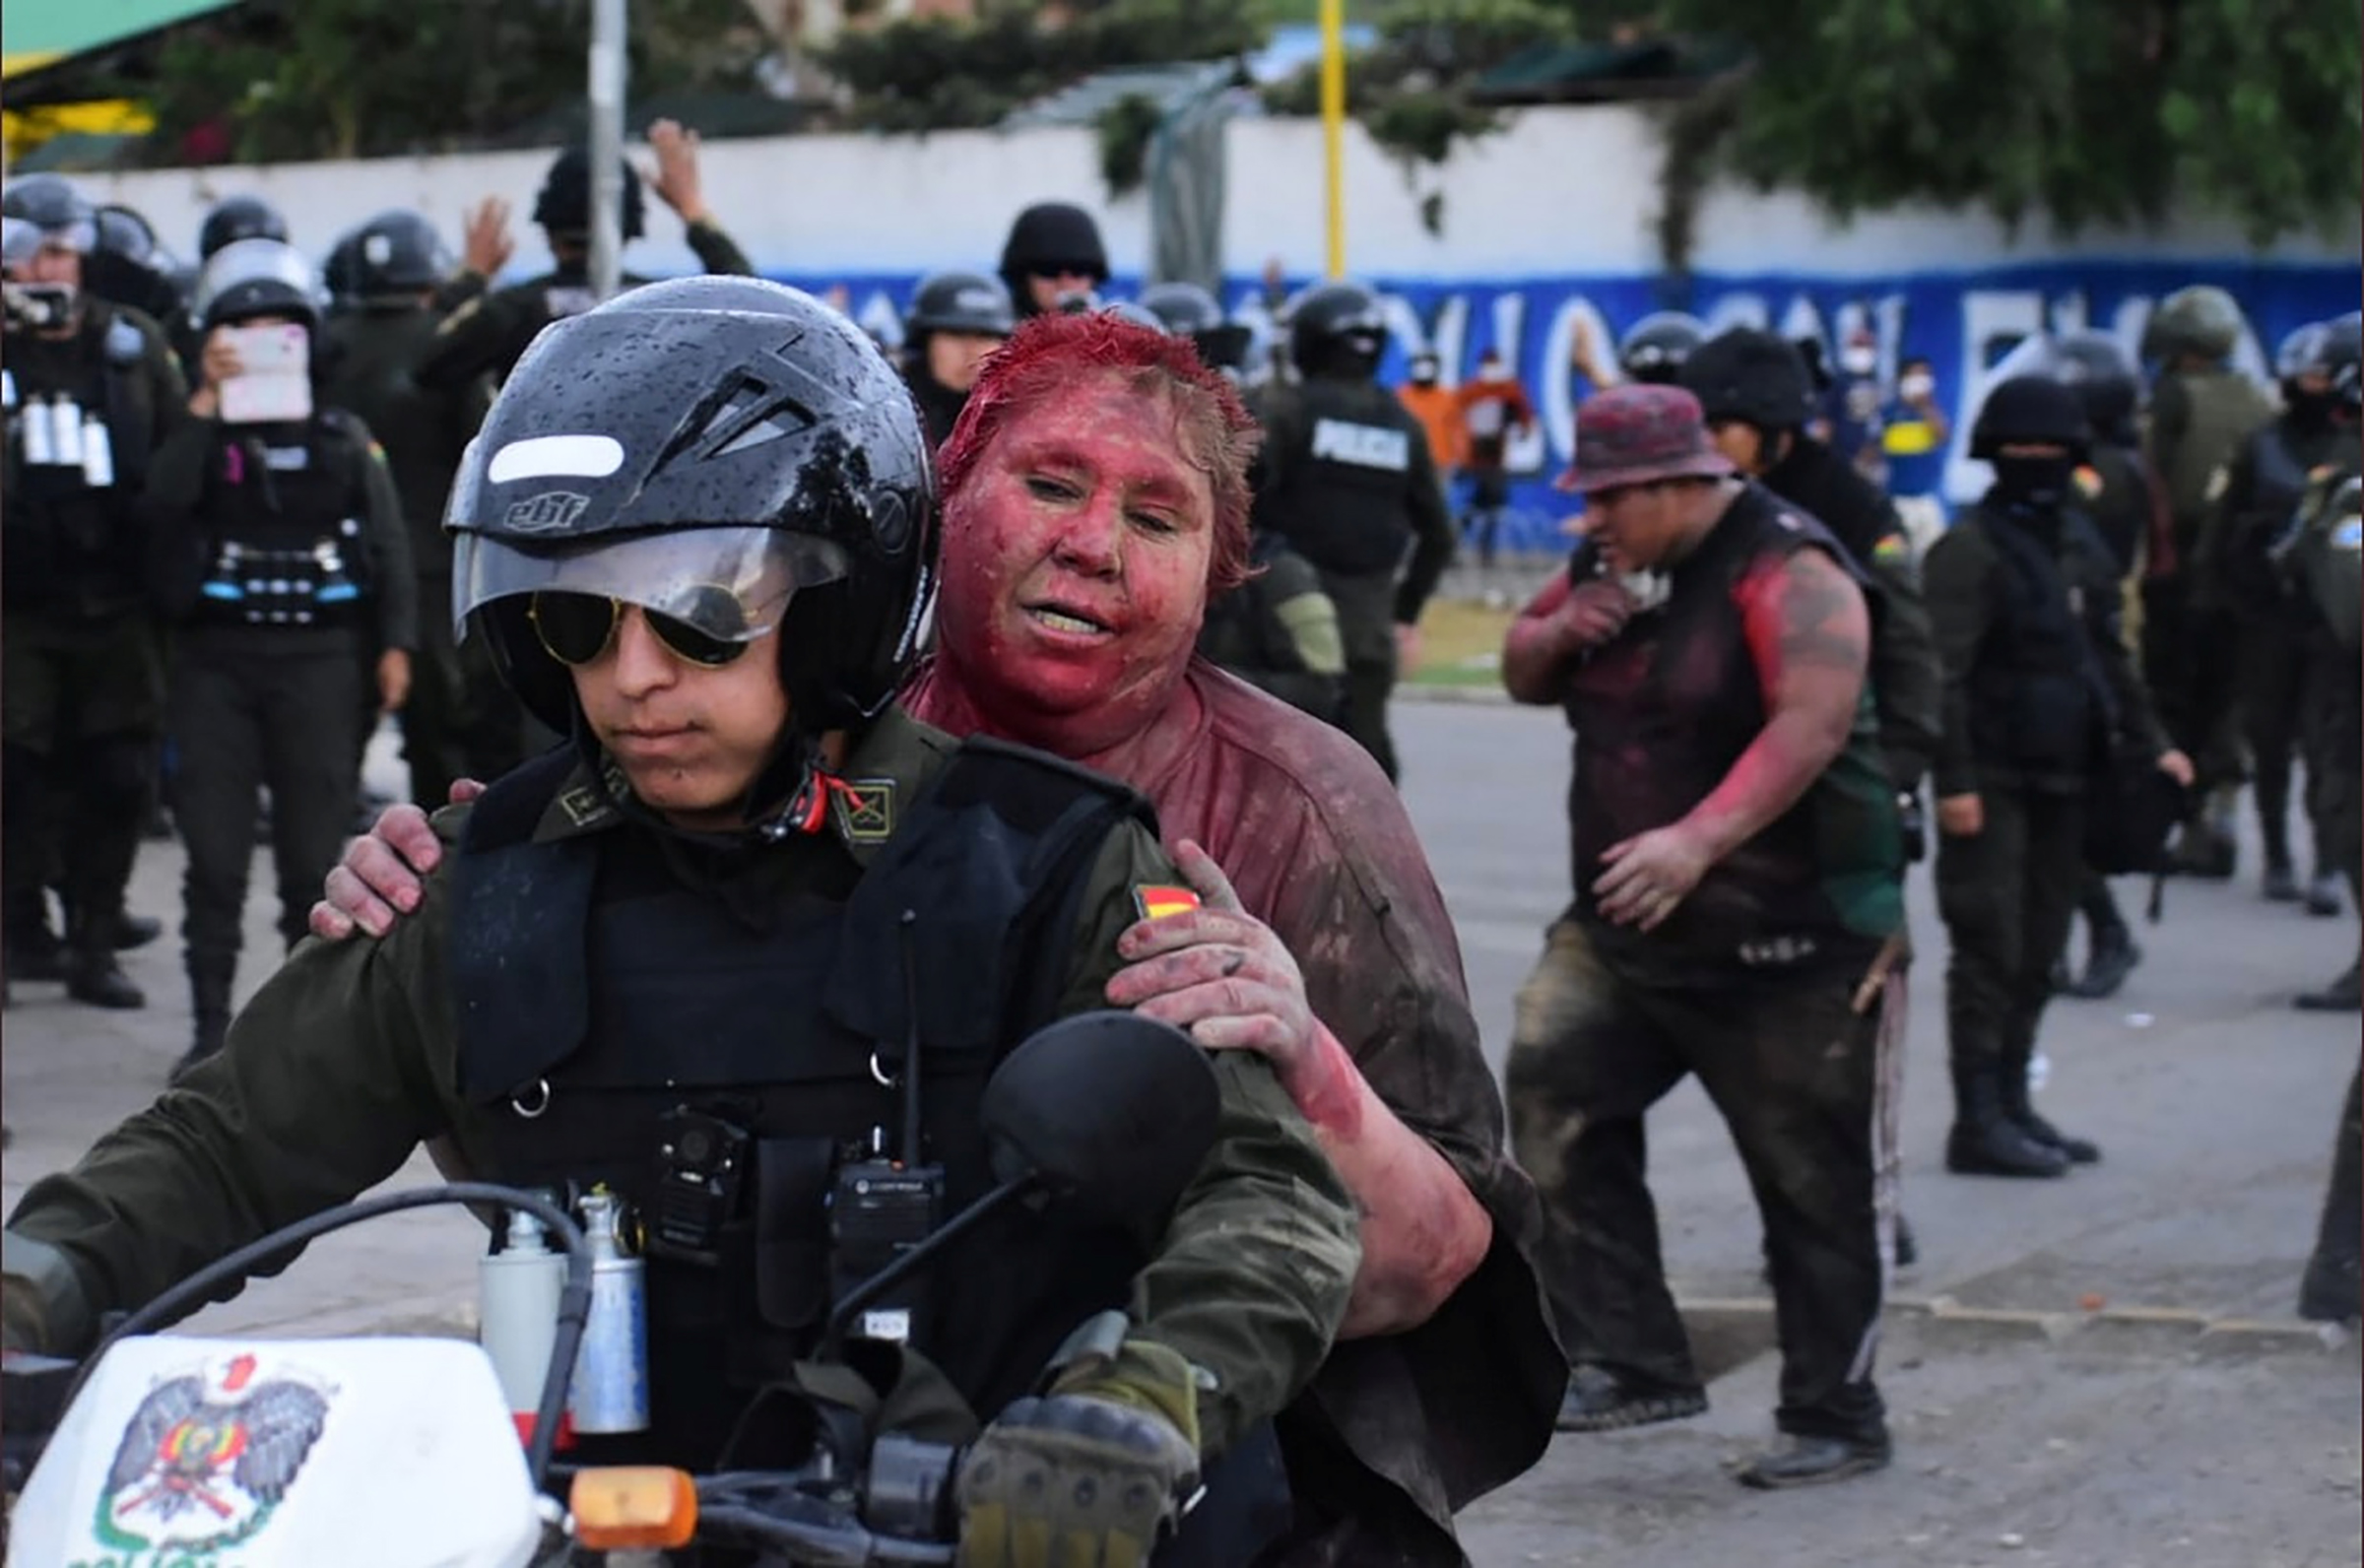 Police rescue Vinto mayor Patricia Arce Guzman on a motorcycle after people threw paint and dirt on her following a fire in Vinto's Town Hall in Bolivia